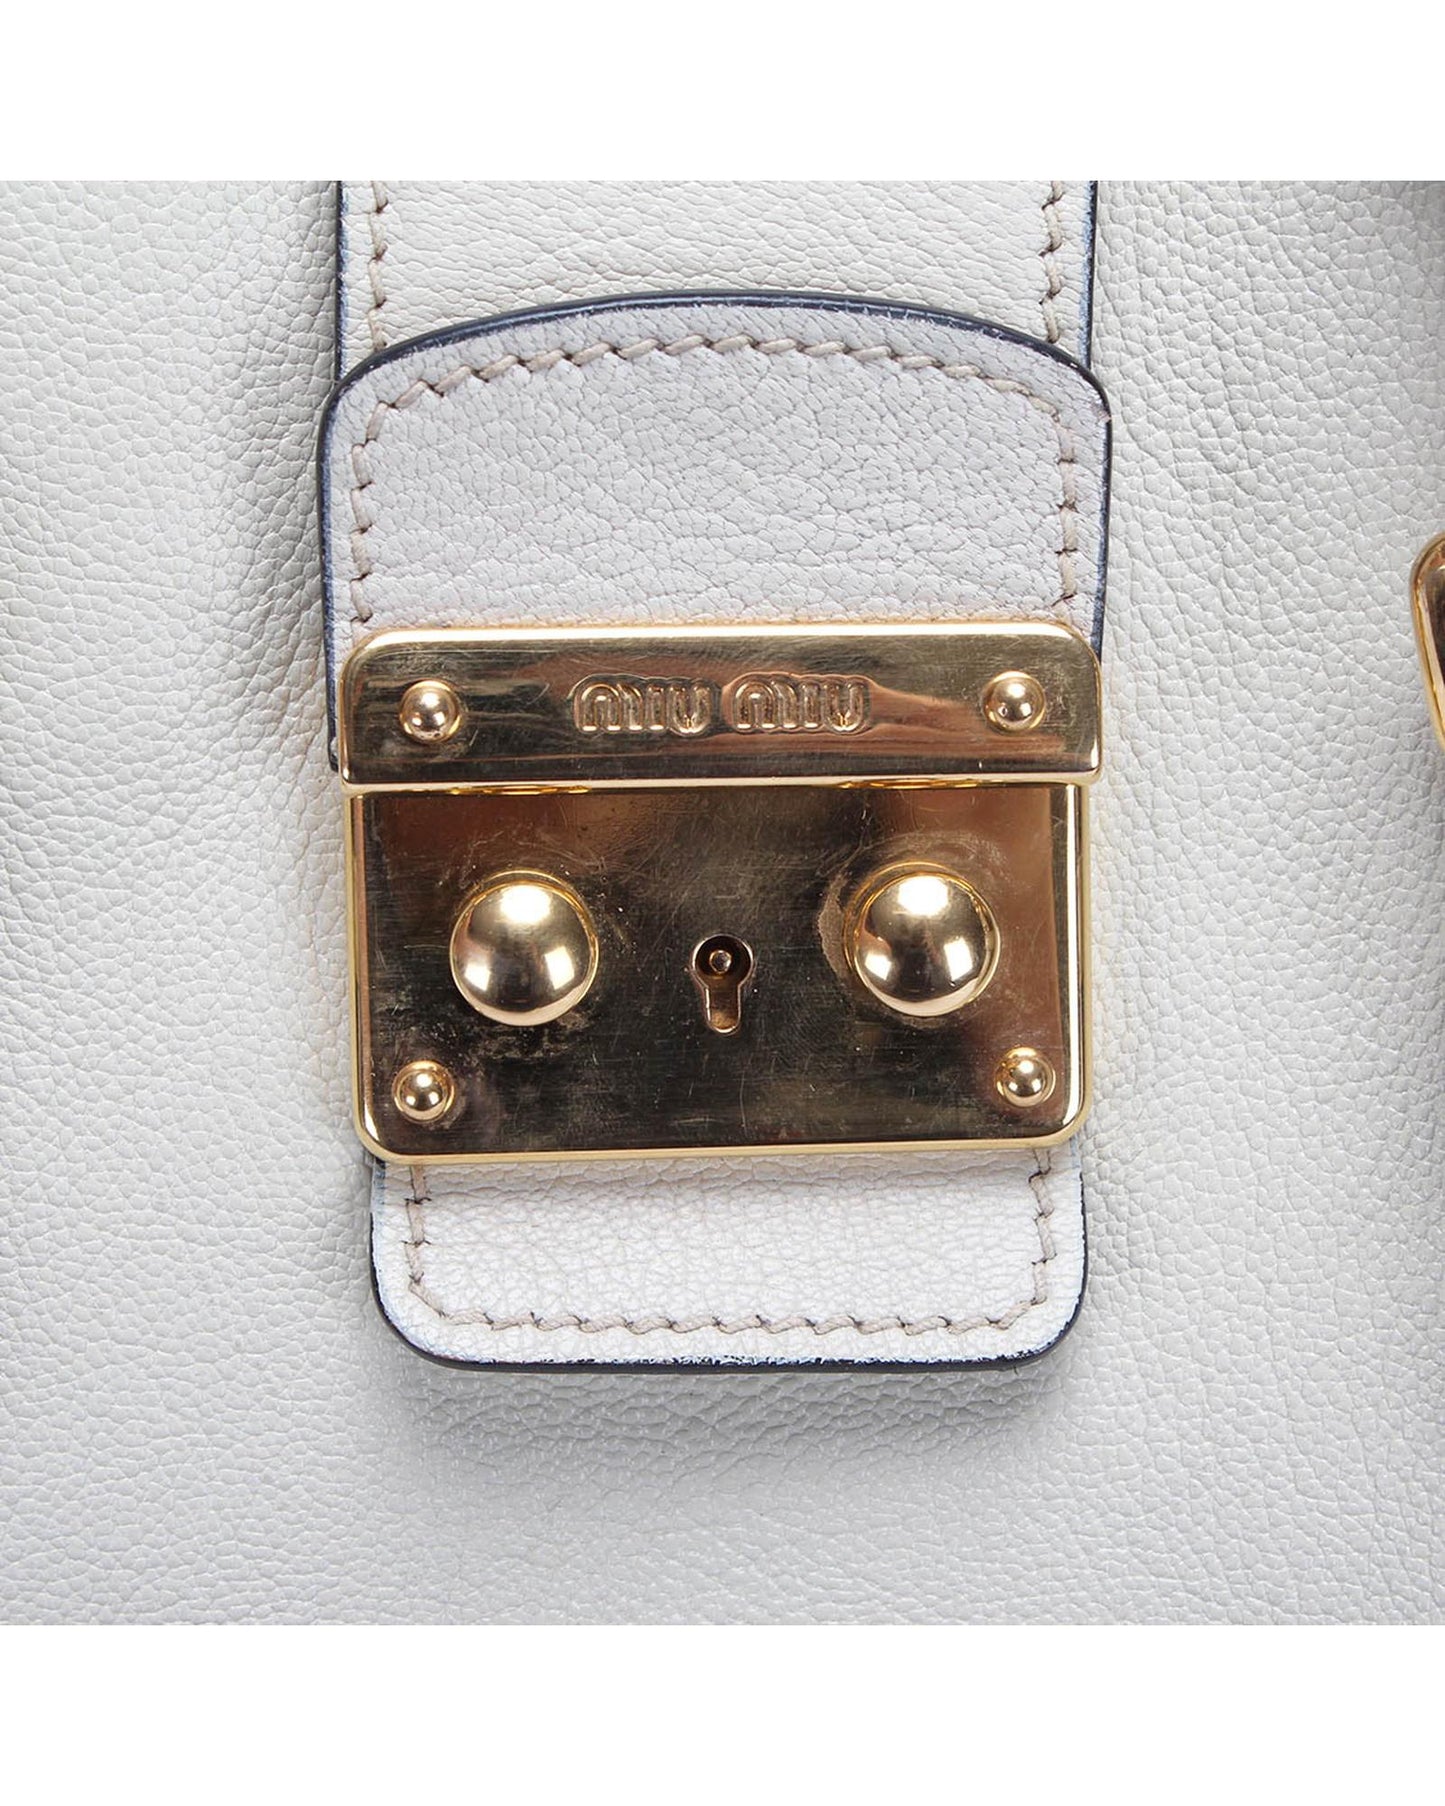 Miu Miu Women's Leather Shoulder Bag in Excellent Condition in White